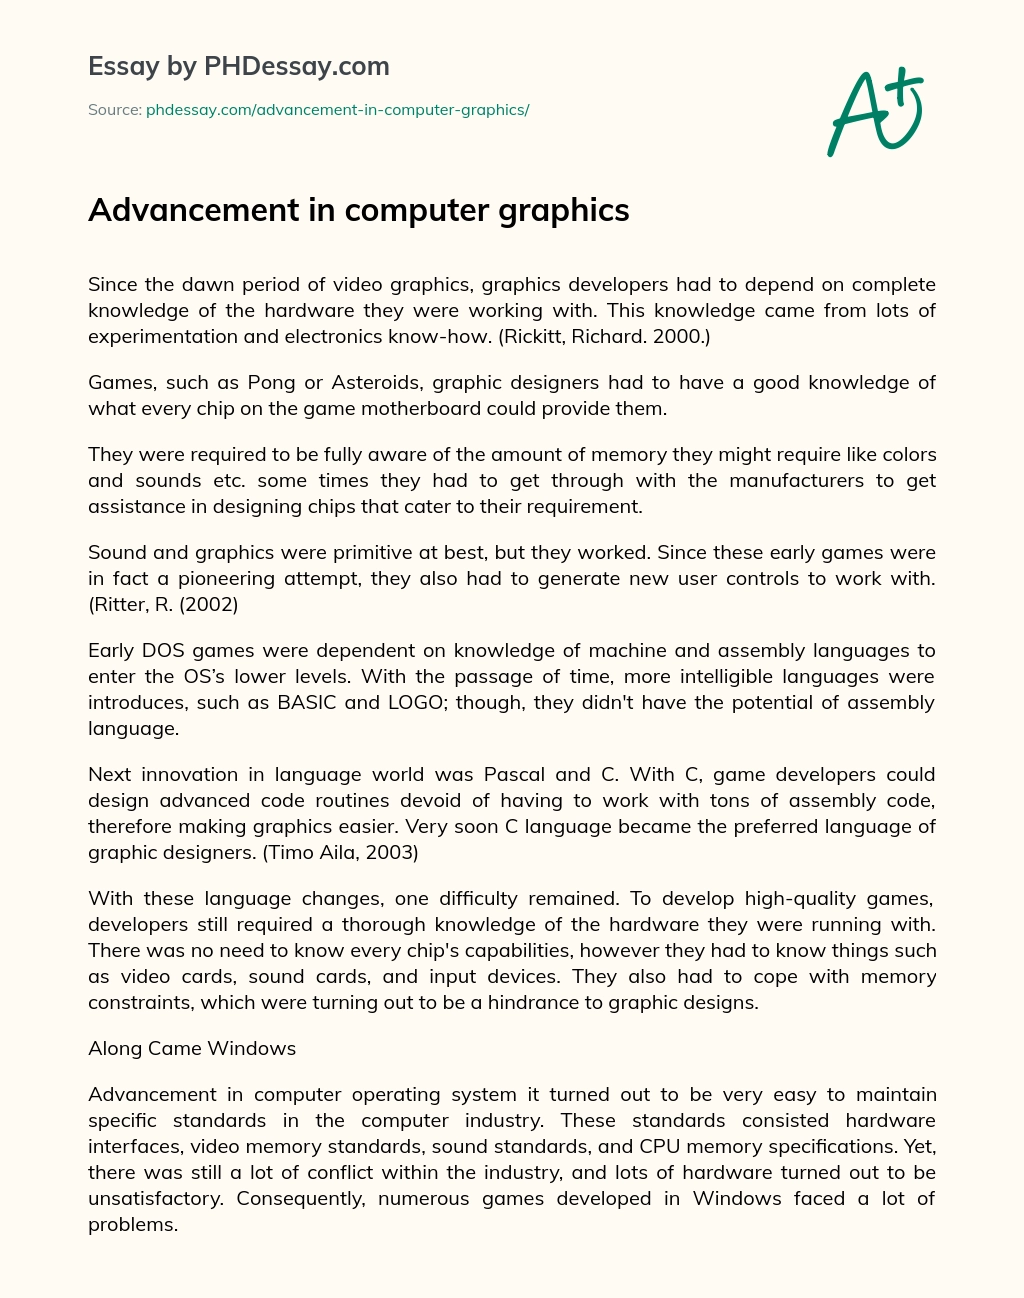 computer graphics essay in english